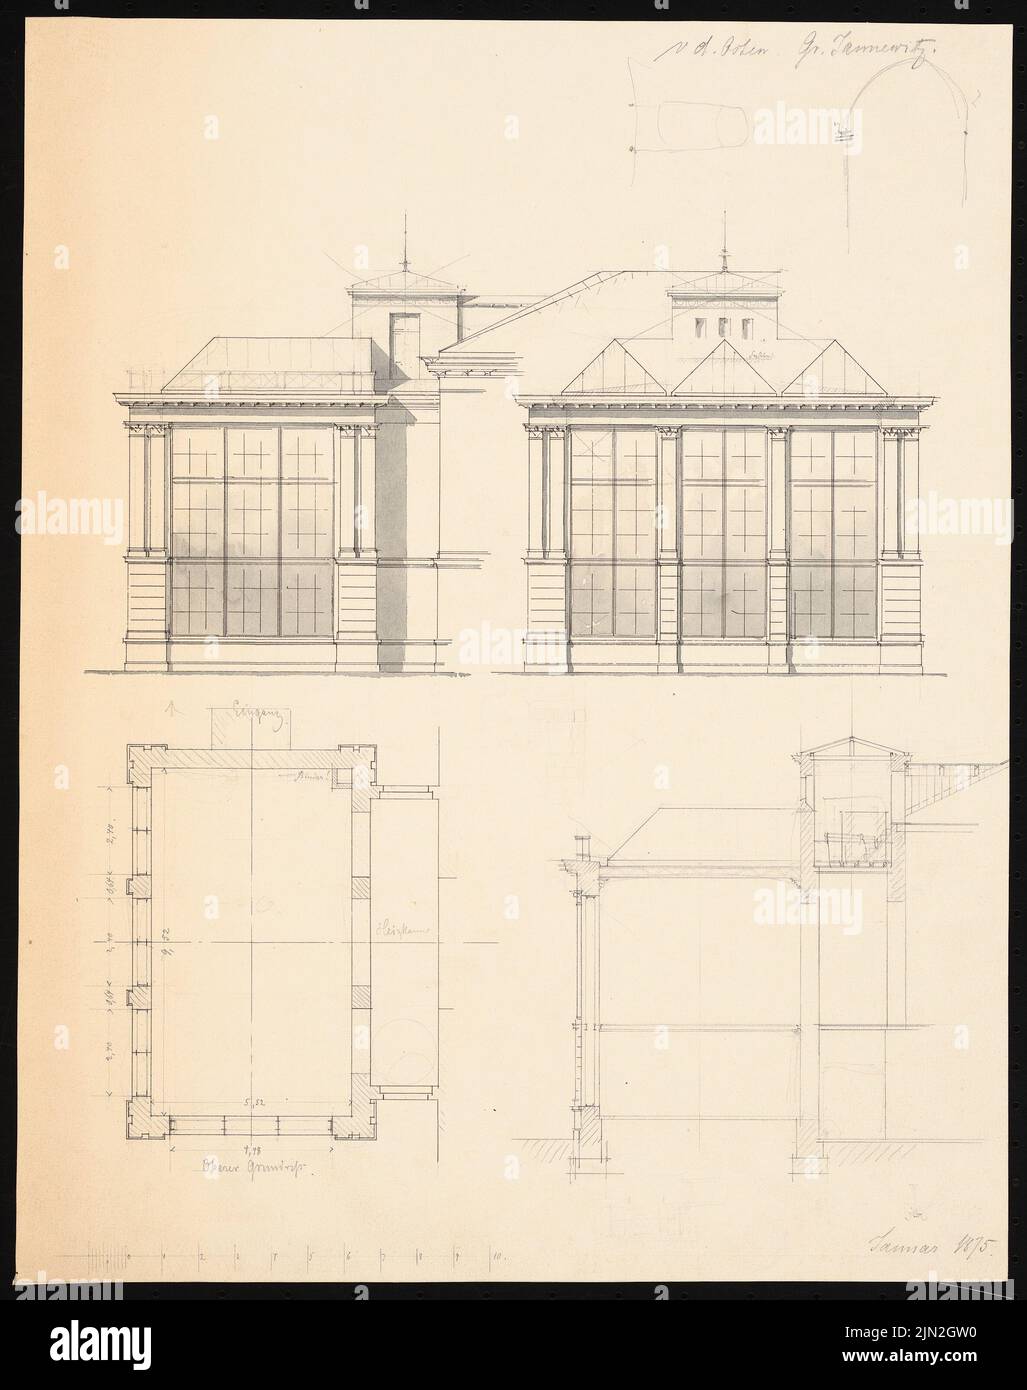 Knoblauch & Wex, hall building and greenhouse for from the east, Groß Jannewitz: floor plan OG, cut and view. Tuser and pencil watercolored on paper, 47.3 x 37.4 cm (including scan edges) Stock Photo